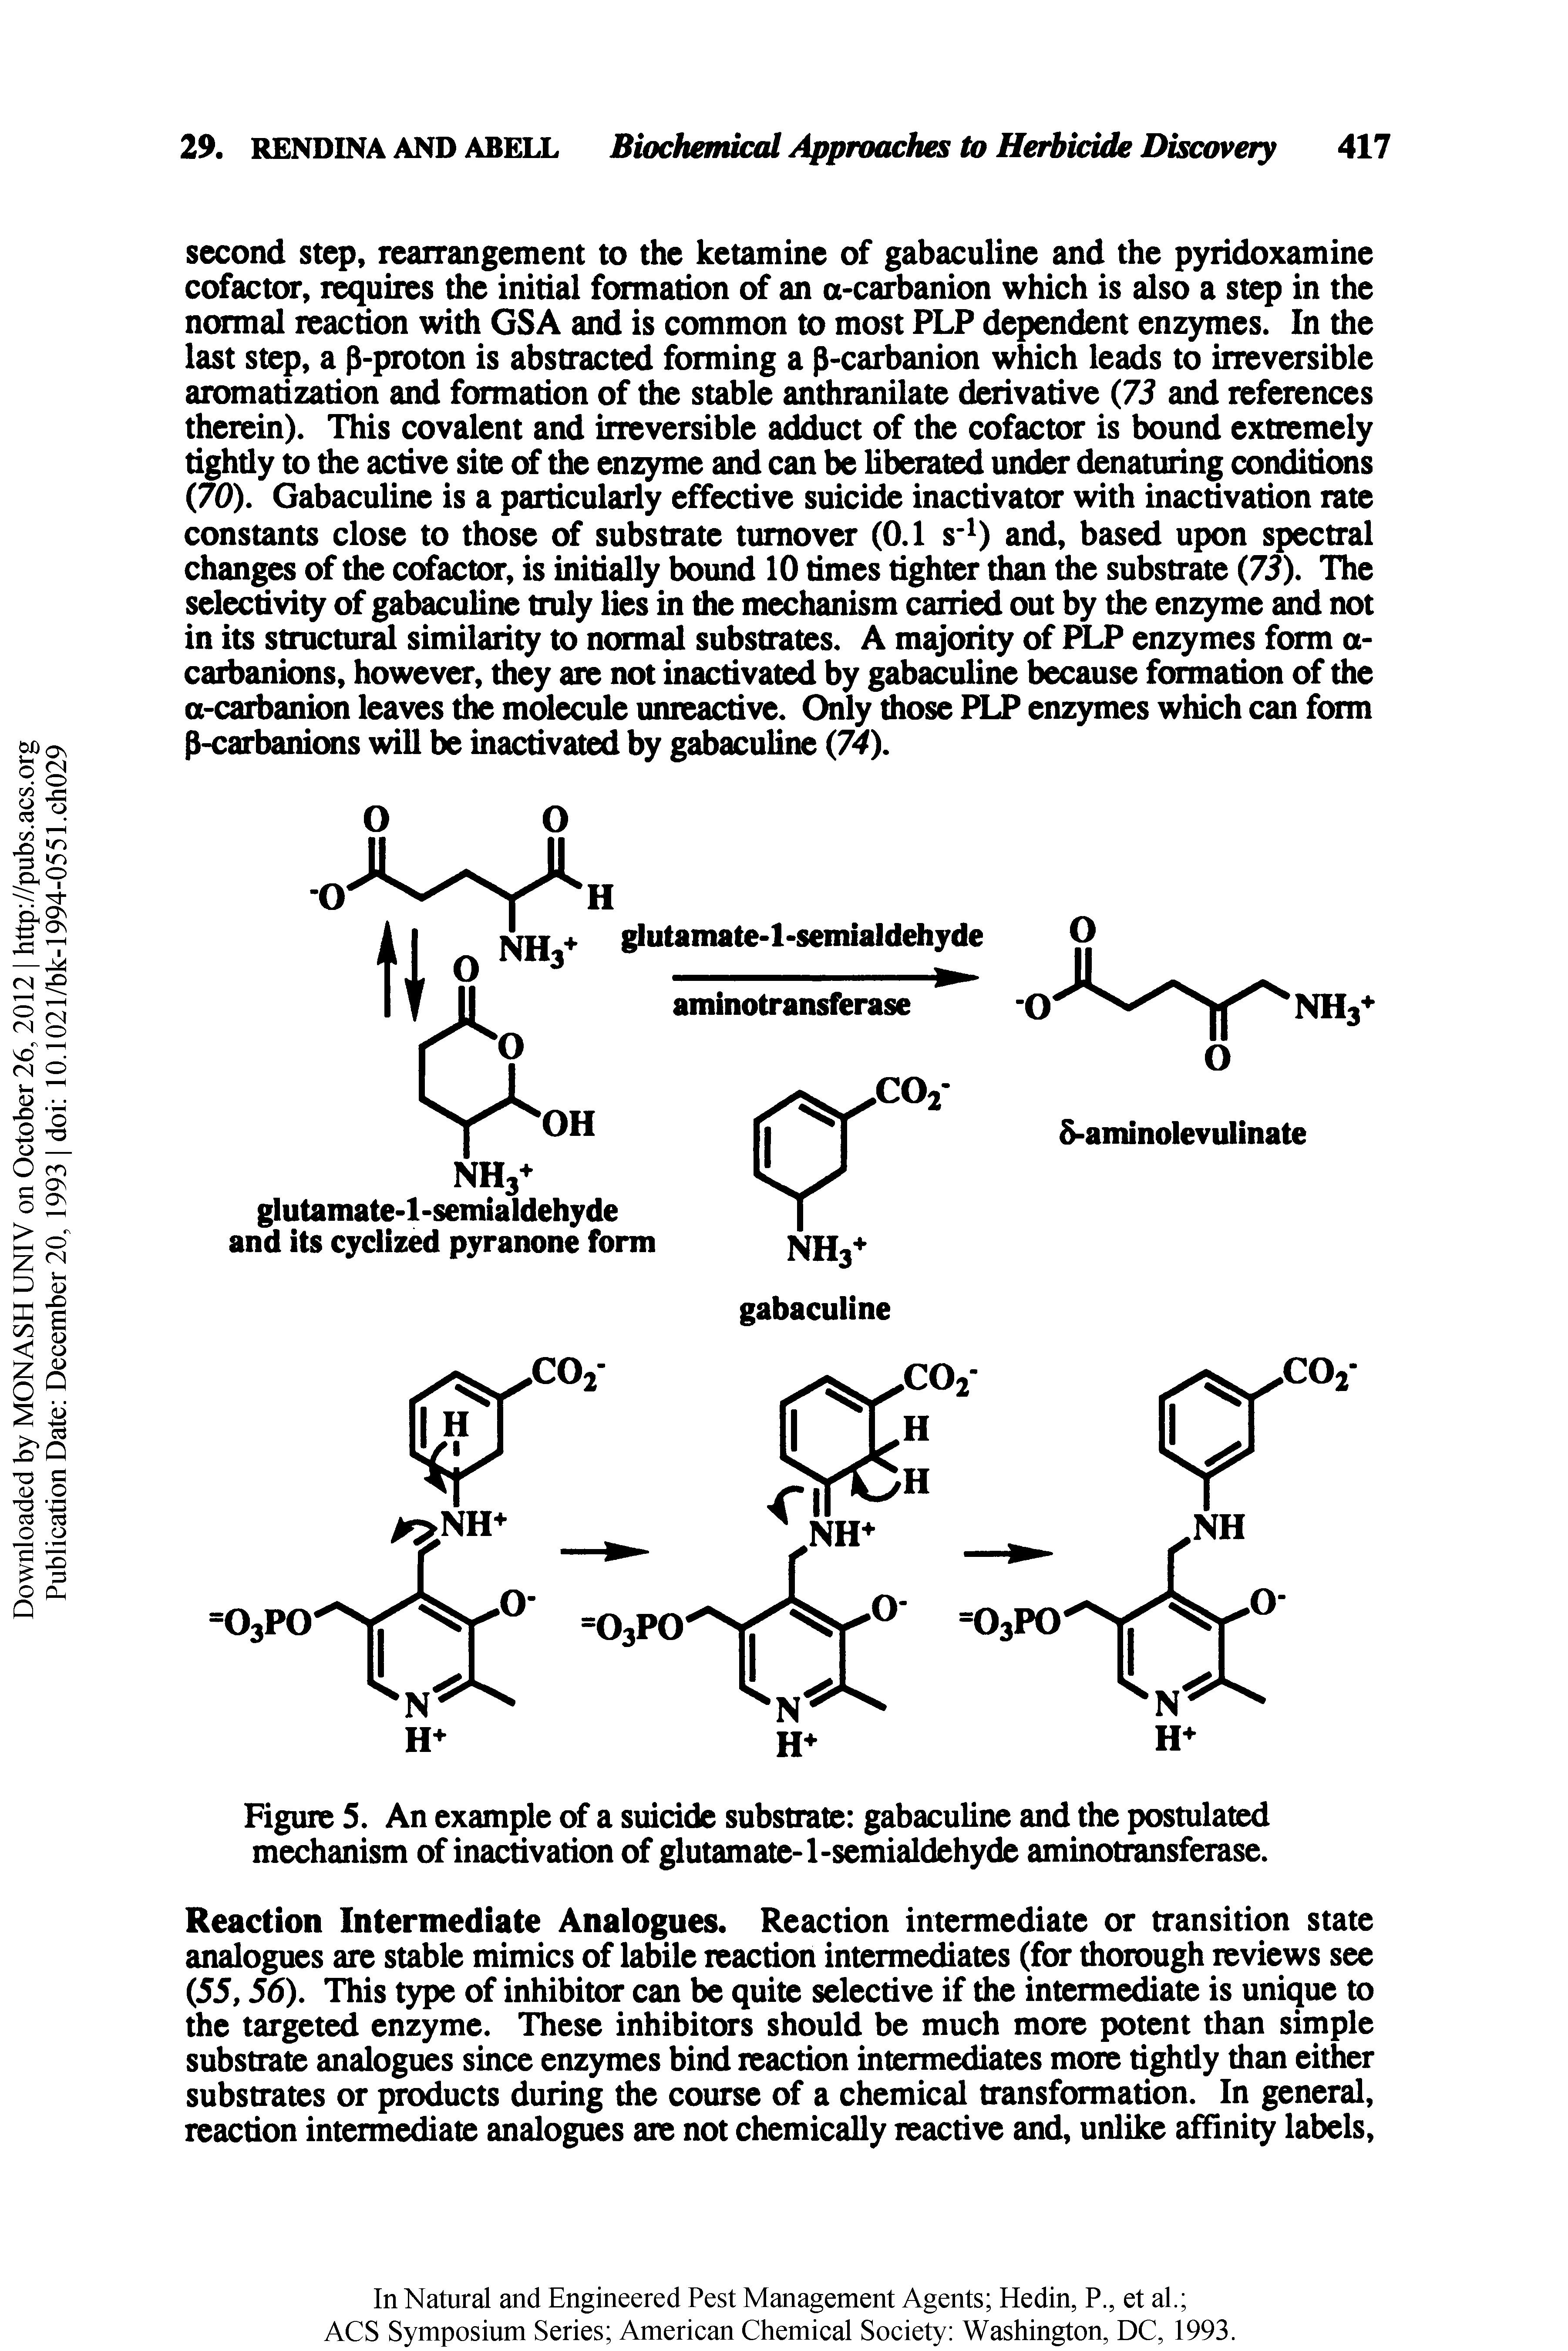 Figure 5. An example of a suicide substrate gabaculine and the postulated mechanism of inactivation of glutamate-l-semialdehyde aminotransferase.